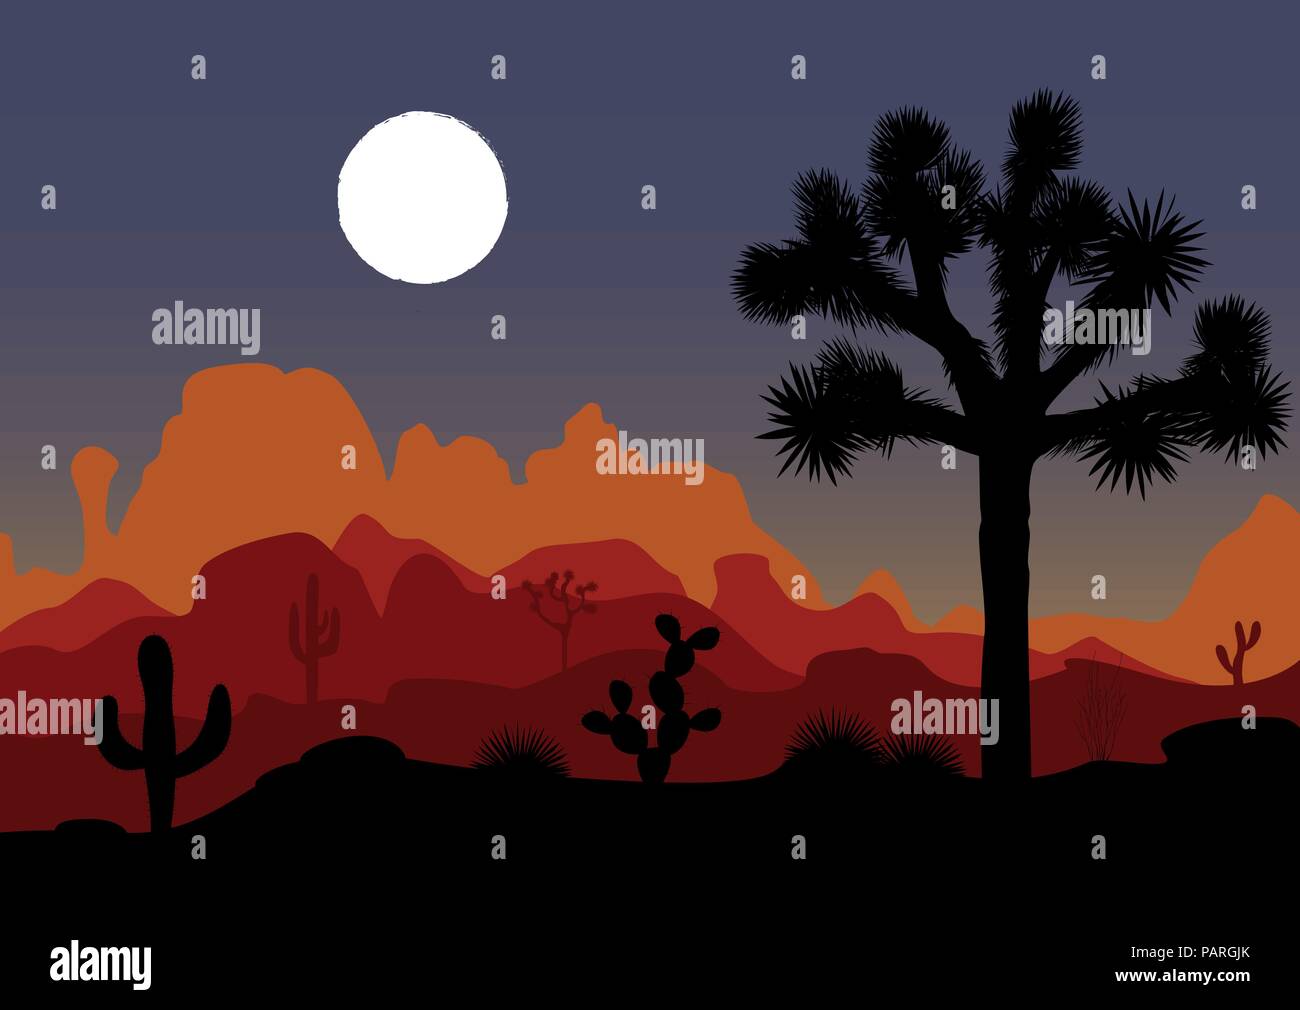 Night landscape with Joshua tree, cactus, and mountains. Vector illustration Stock Vector